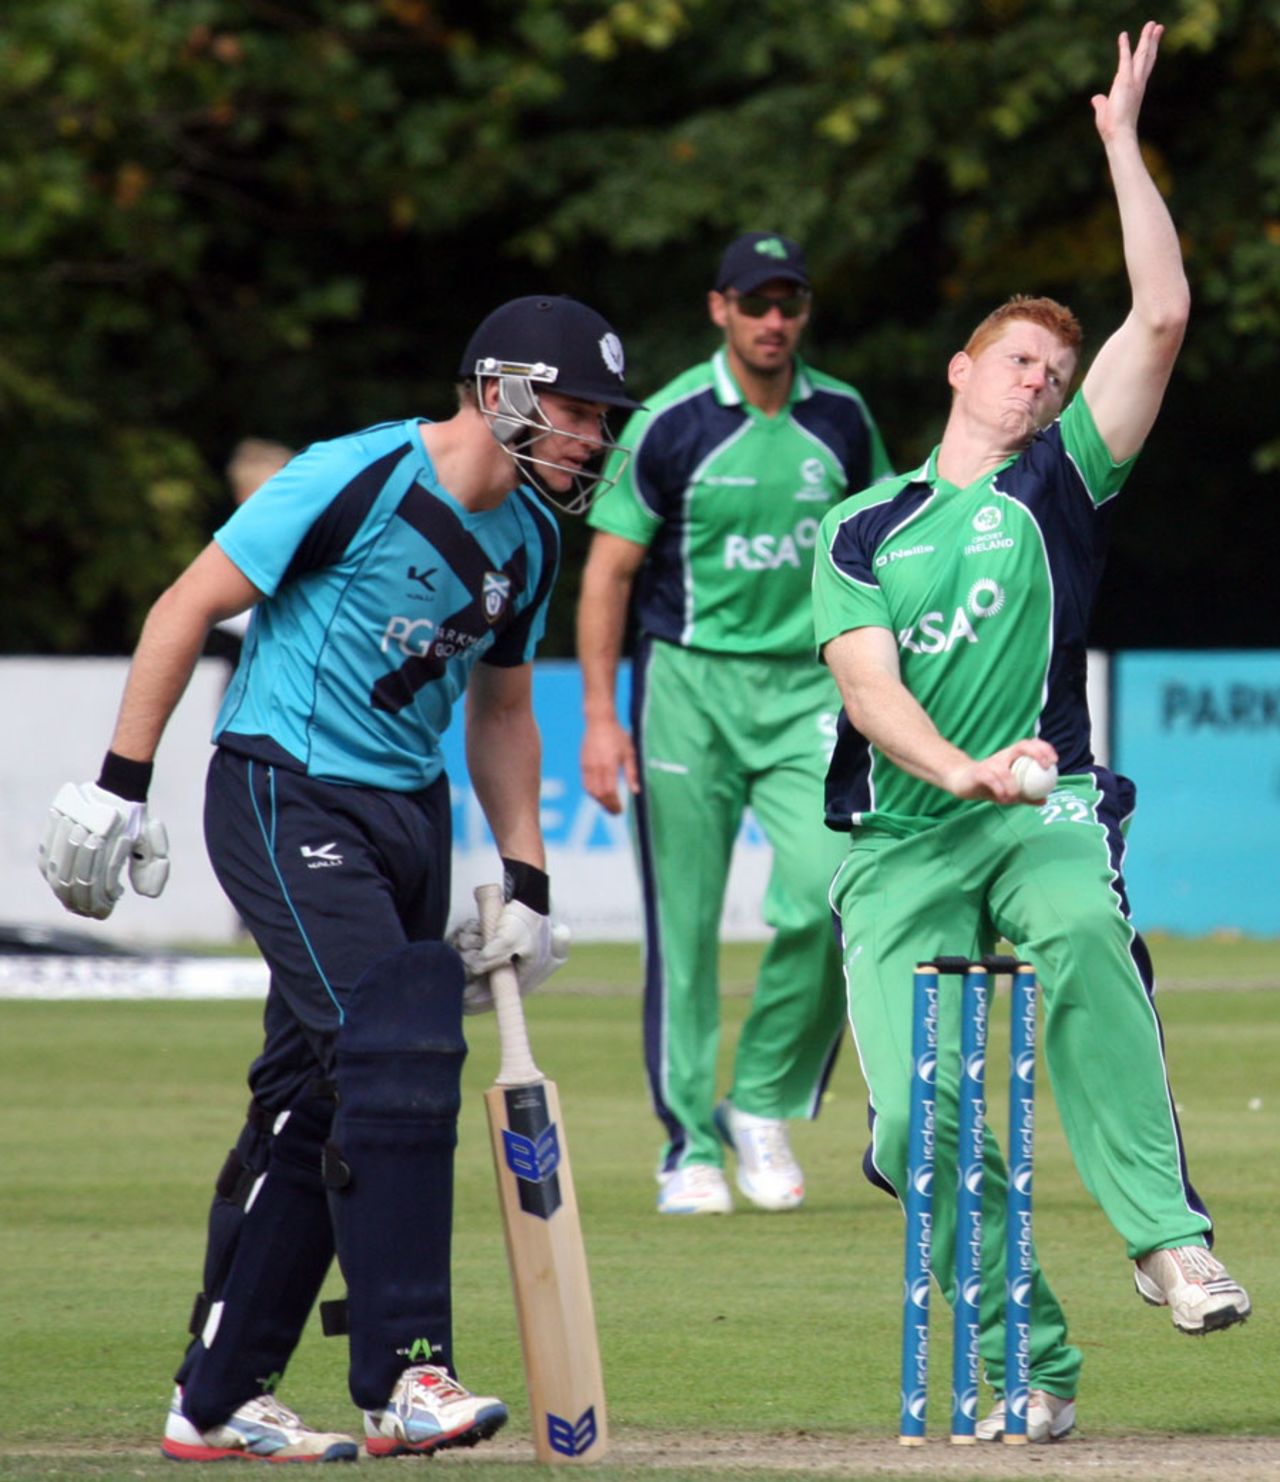 Kevin O'Brien in his delivery stride, Ireland v Scotland, ICC World Cricket League Championship, Belfast, September 8, 2013